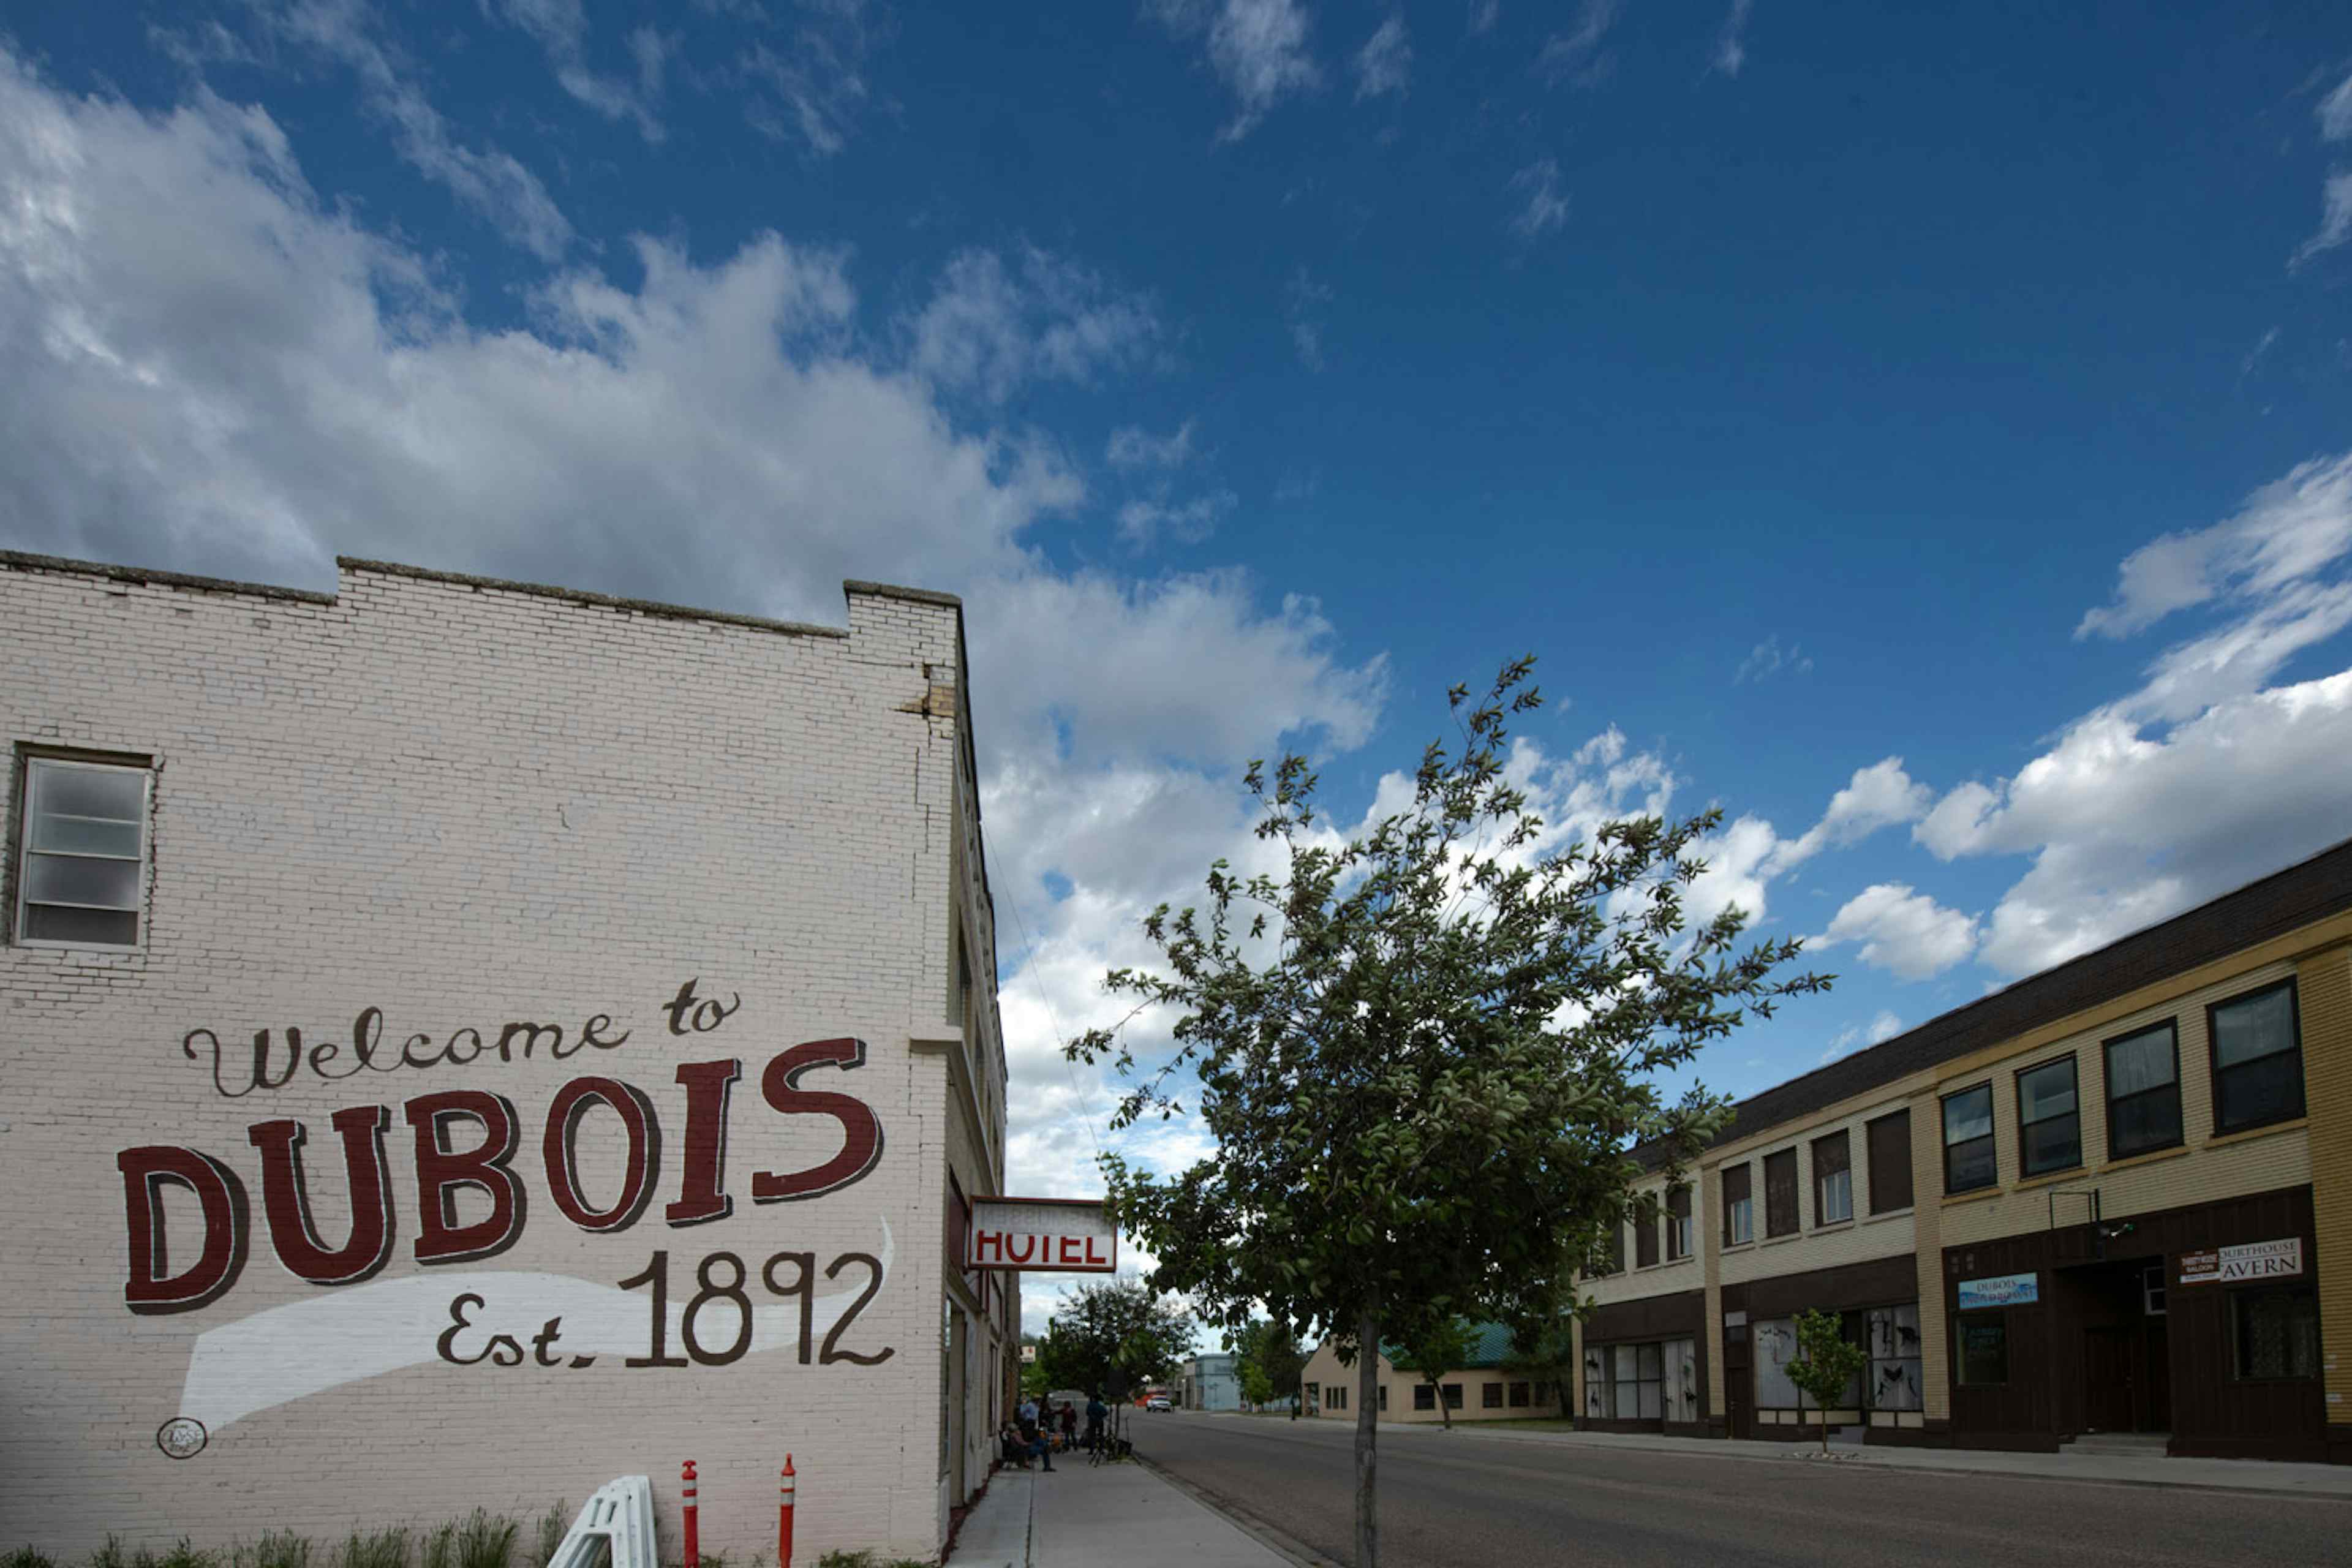 Downtown Dubois ID, in Eastern Idaho and a part of Yellowstone Teton Territory.